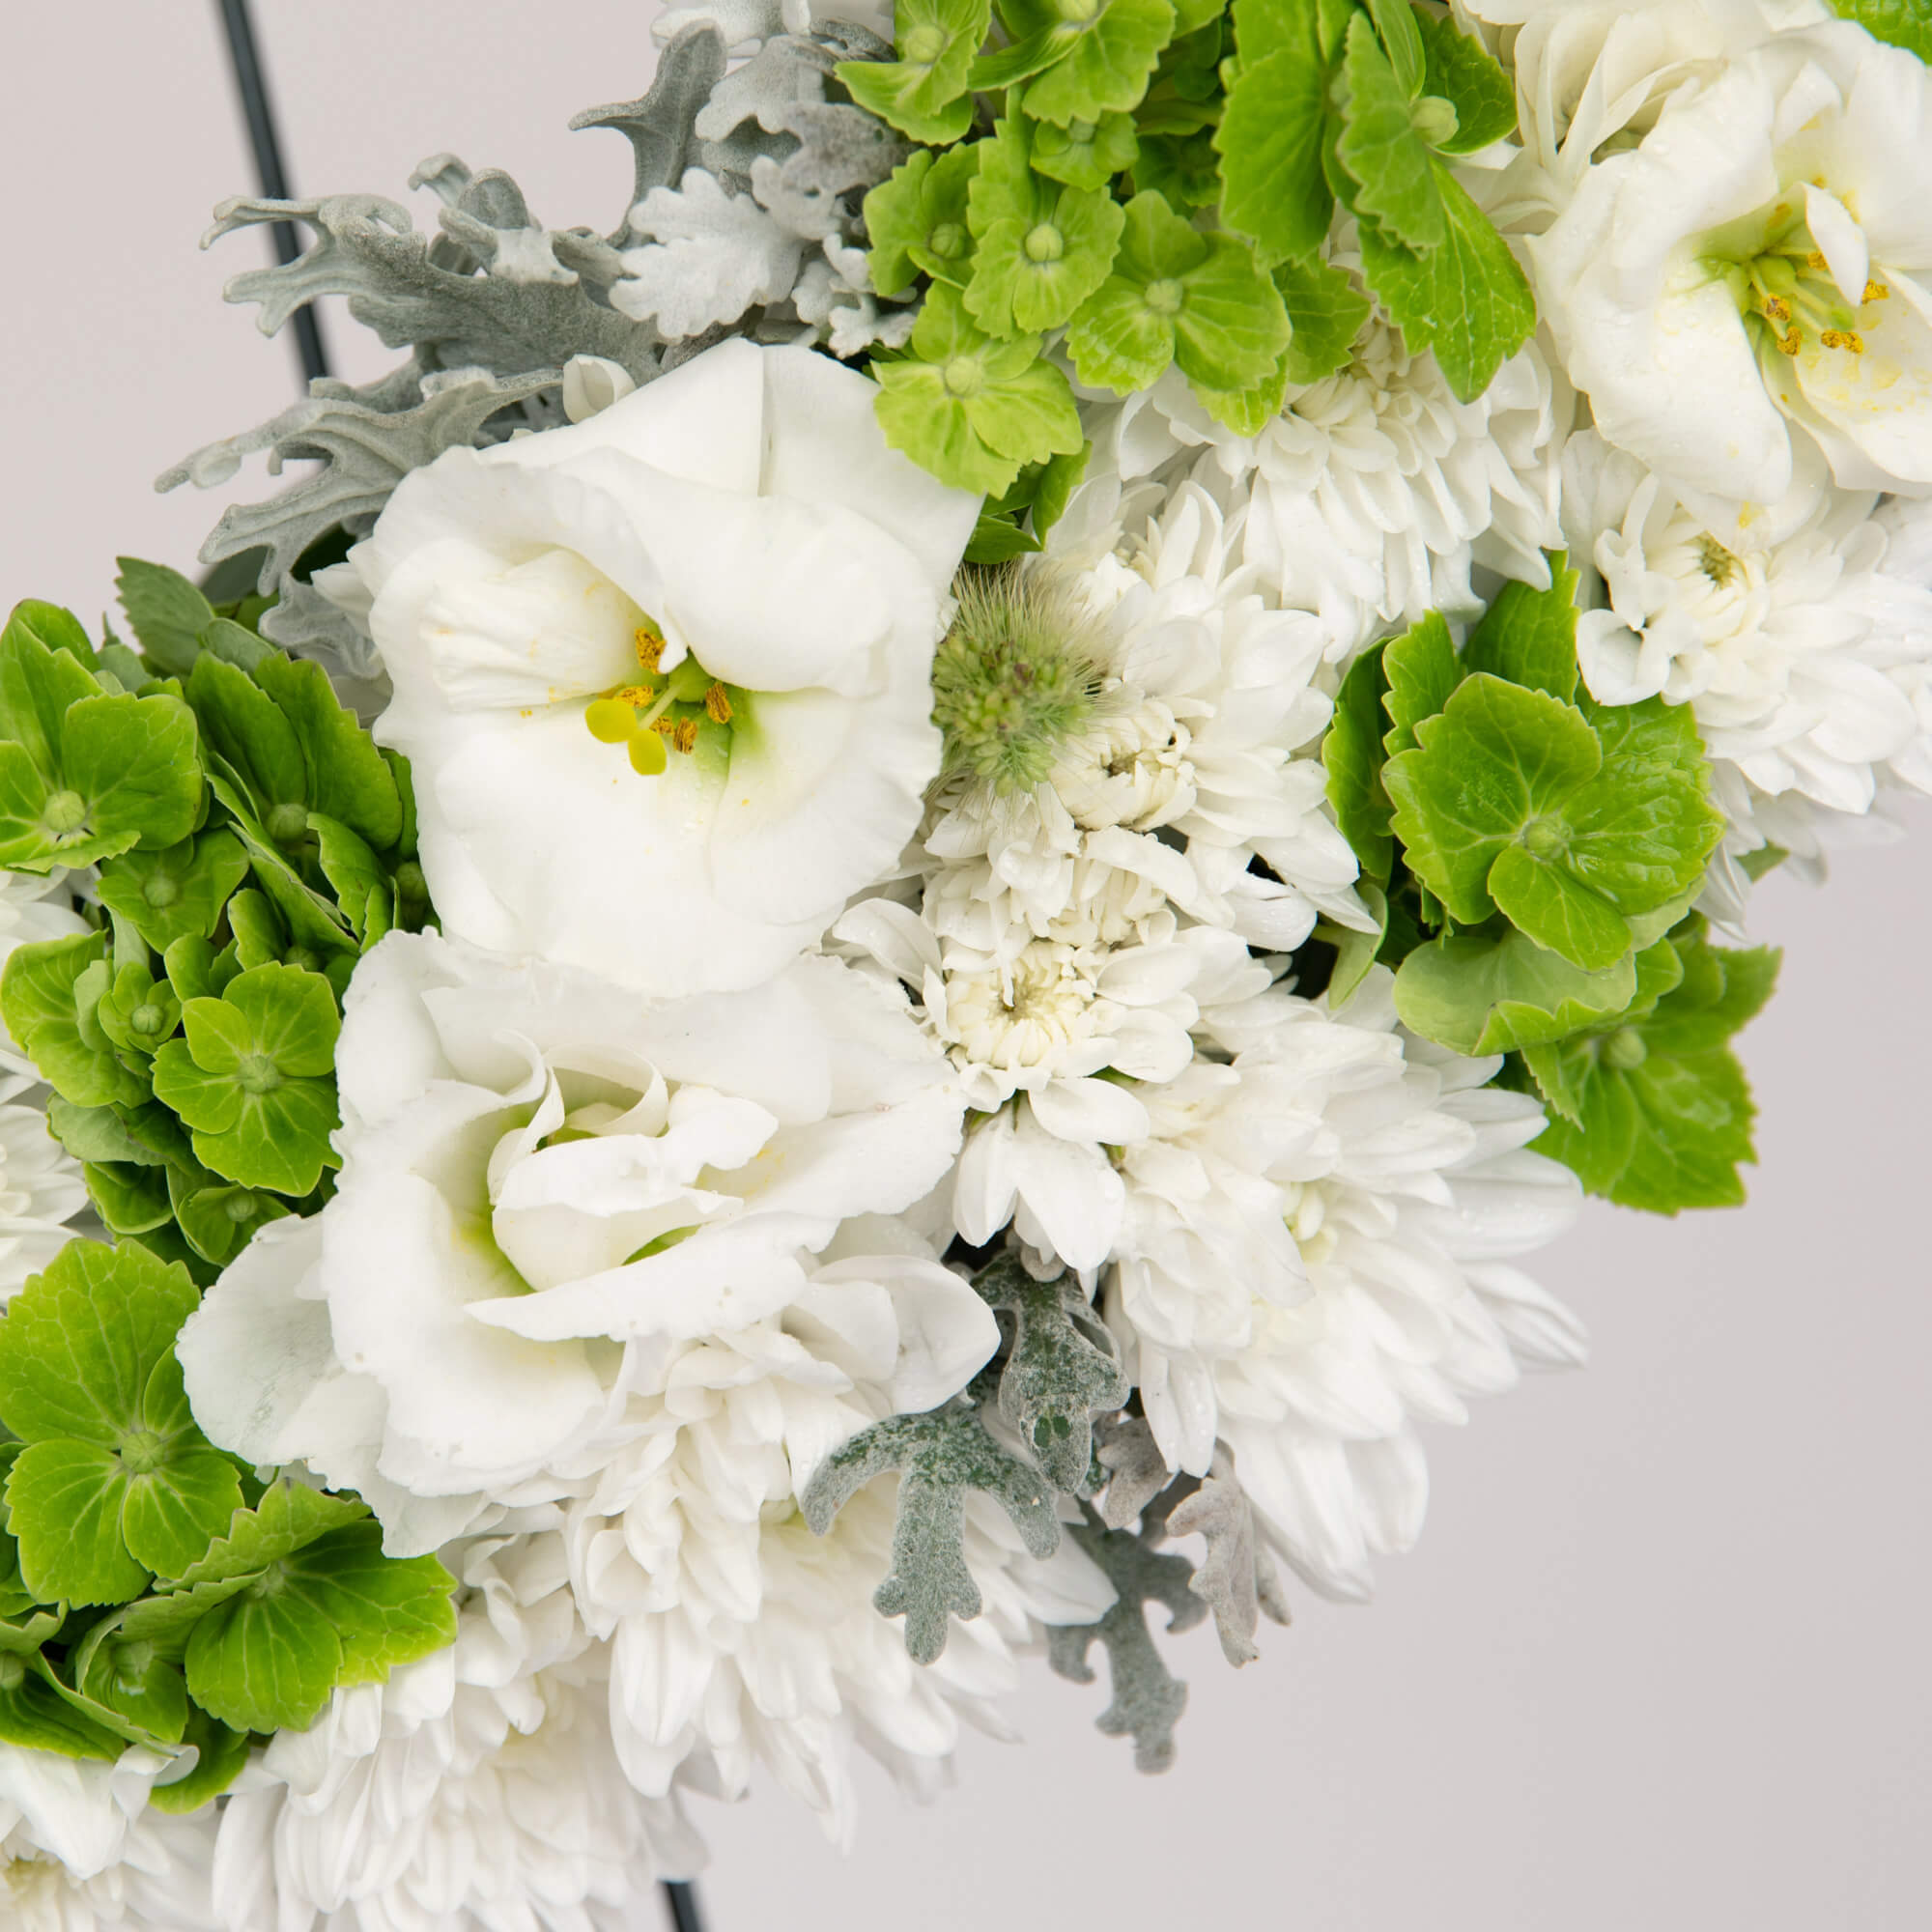 Funeral wreath with hydrangea and lisianthus